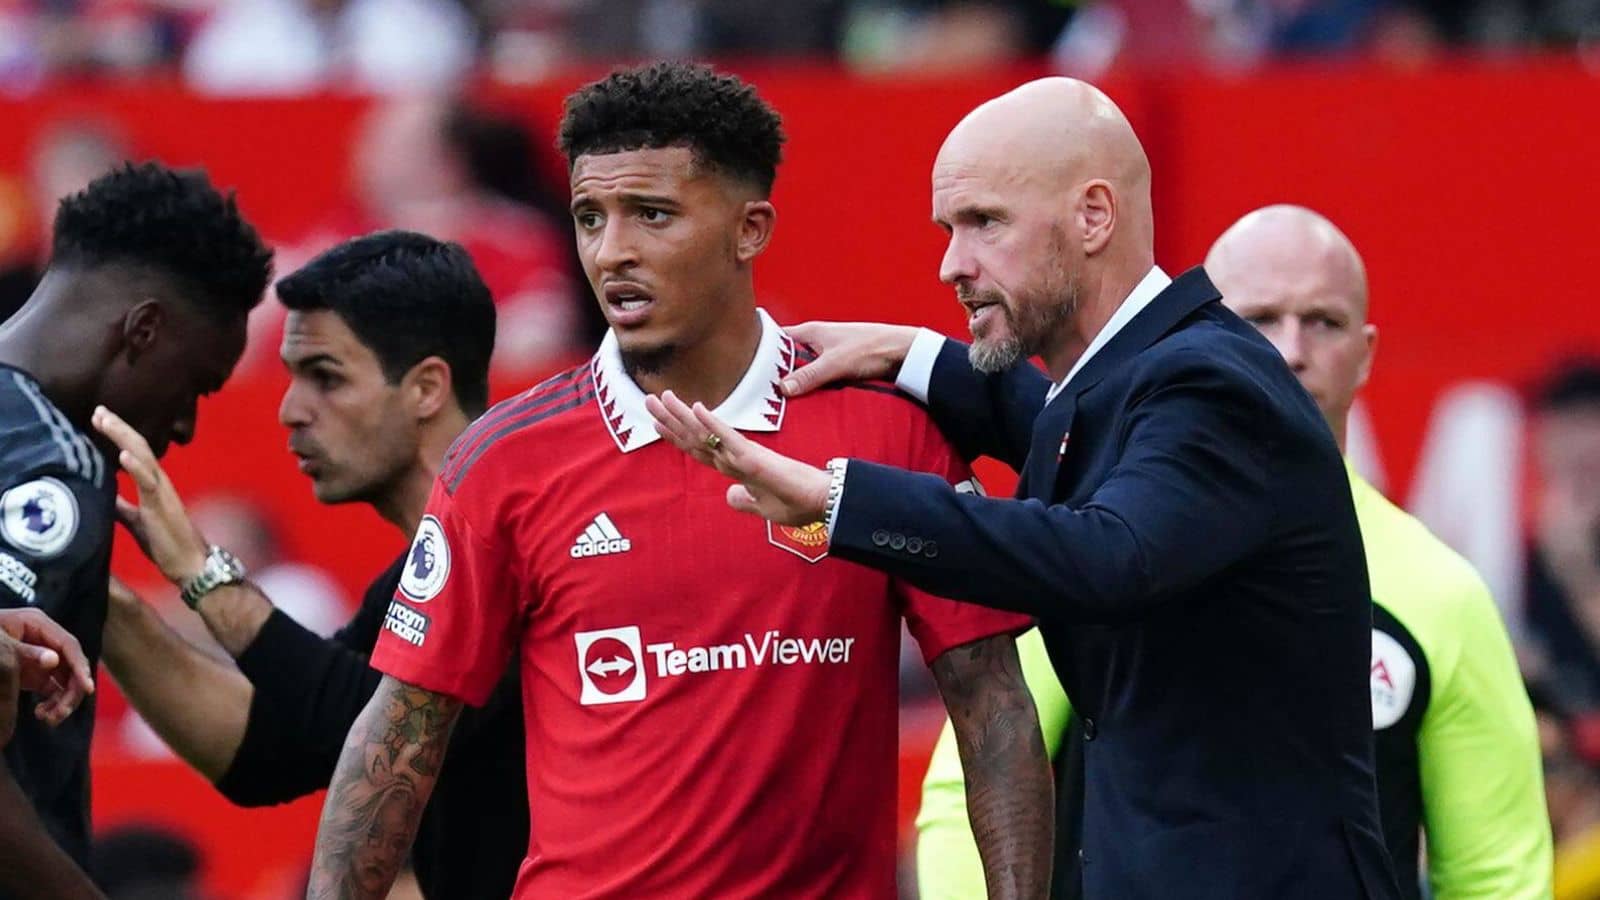 Tensions Rise at Manchester United: The Sancho and Ten Hag Drama